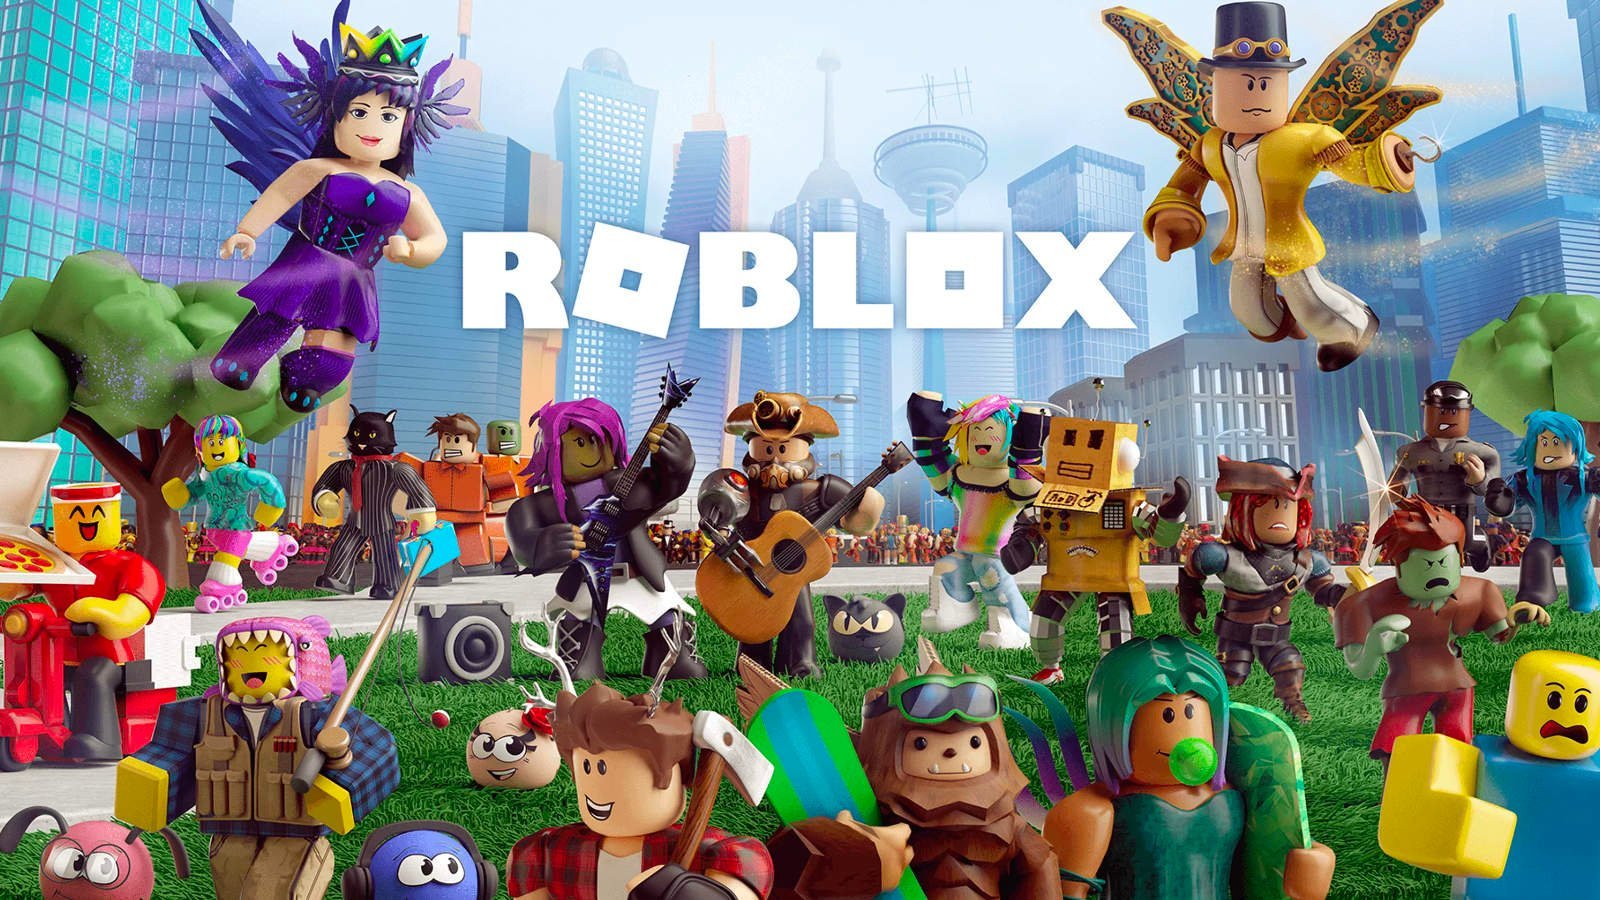 Roblox Promo Codes List Redeem Free Items Robux And Clothes - toy code redemption page roblox games